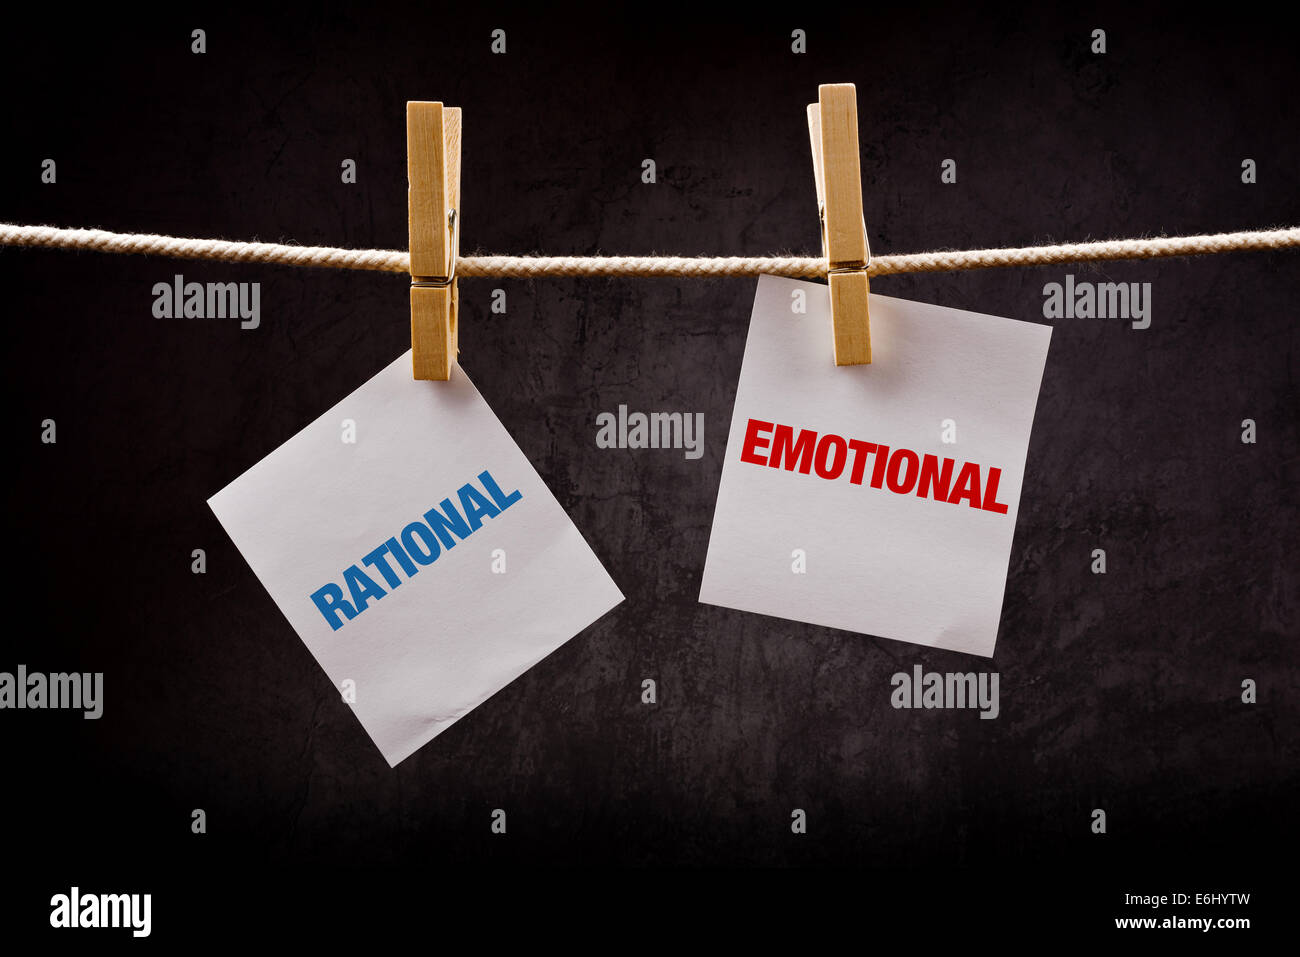 Rational vs Emotional concept. Words printed on note paper and attached to rope with clothes pins. Stock Photo